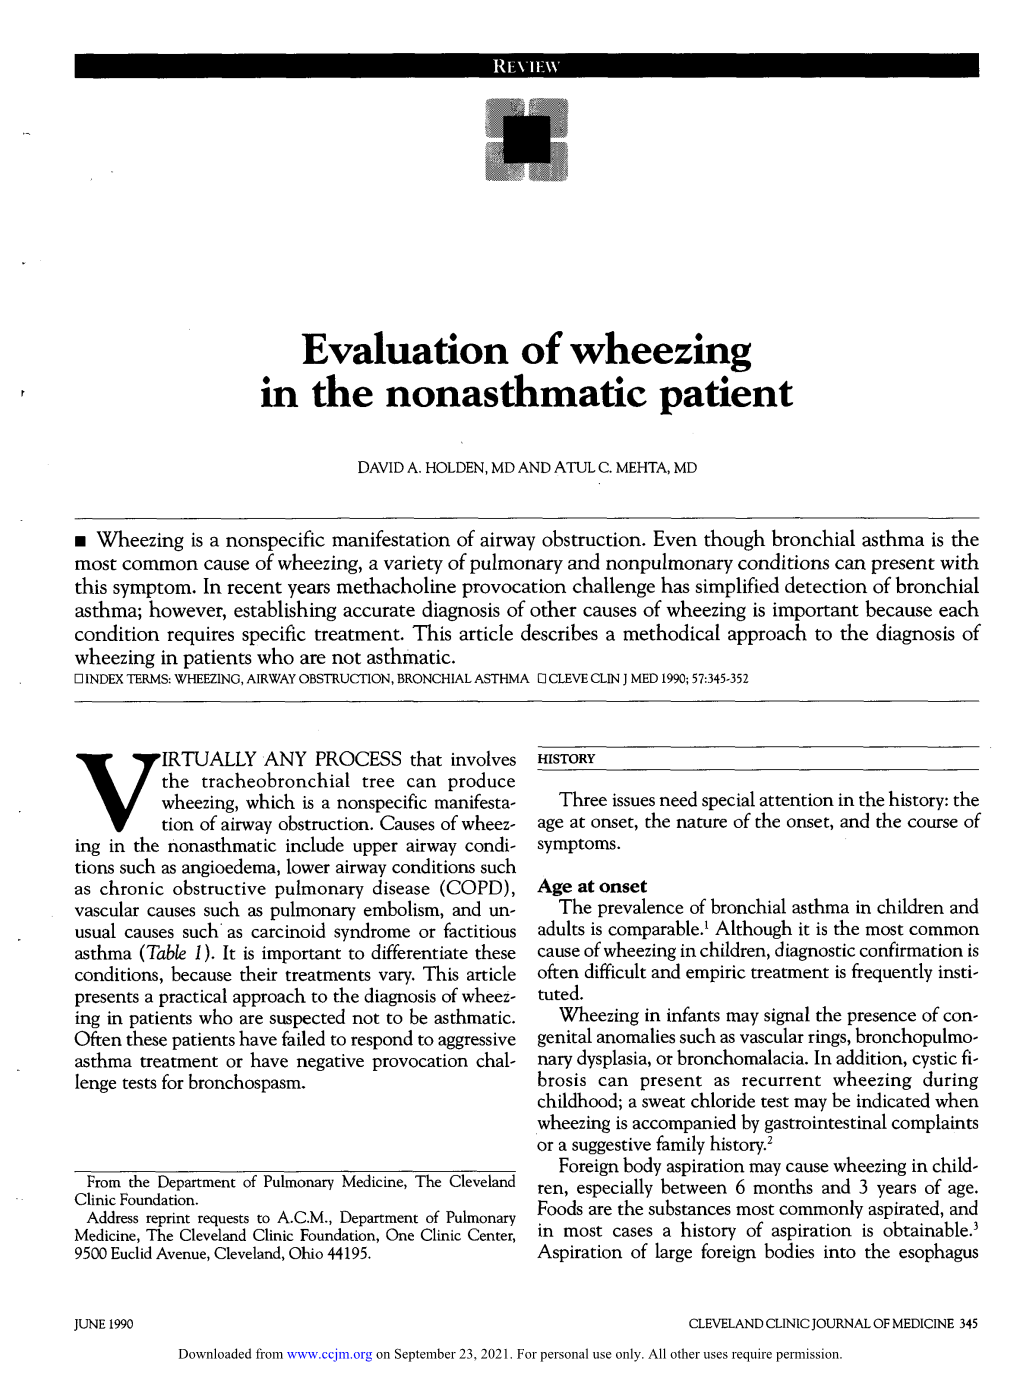 Evaluation of Wheezing in the Nonasthmatic Patient